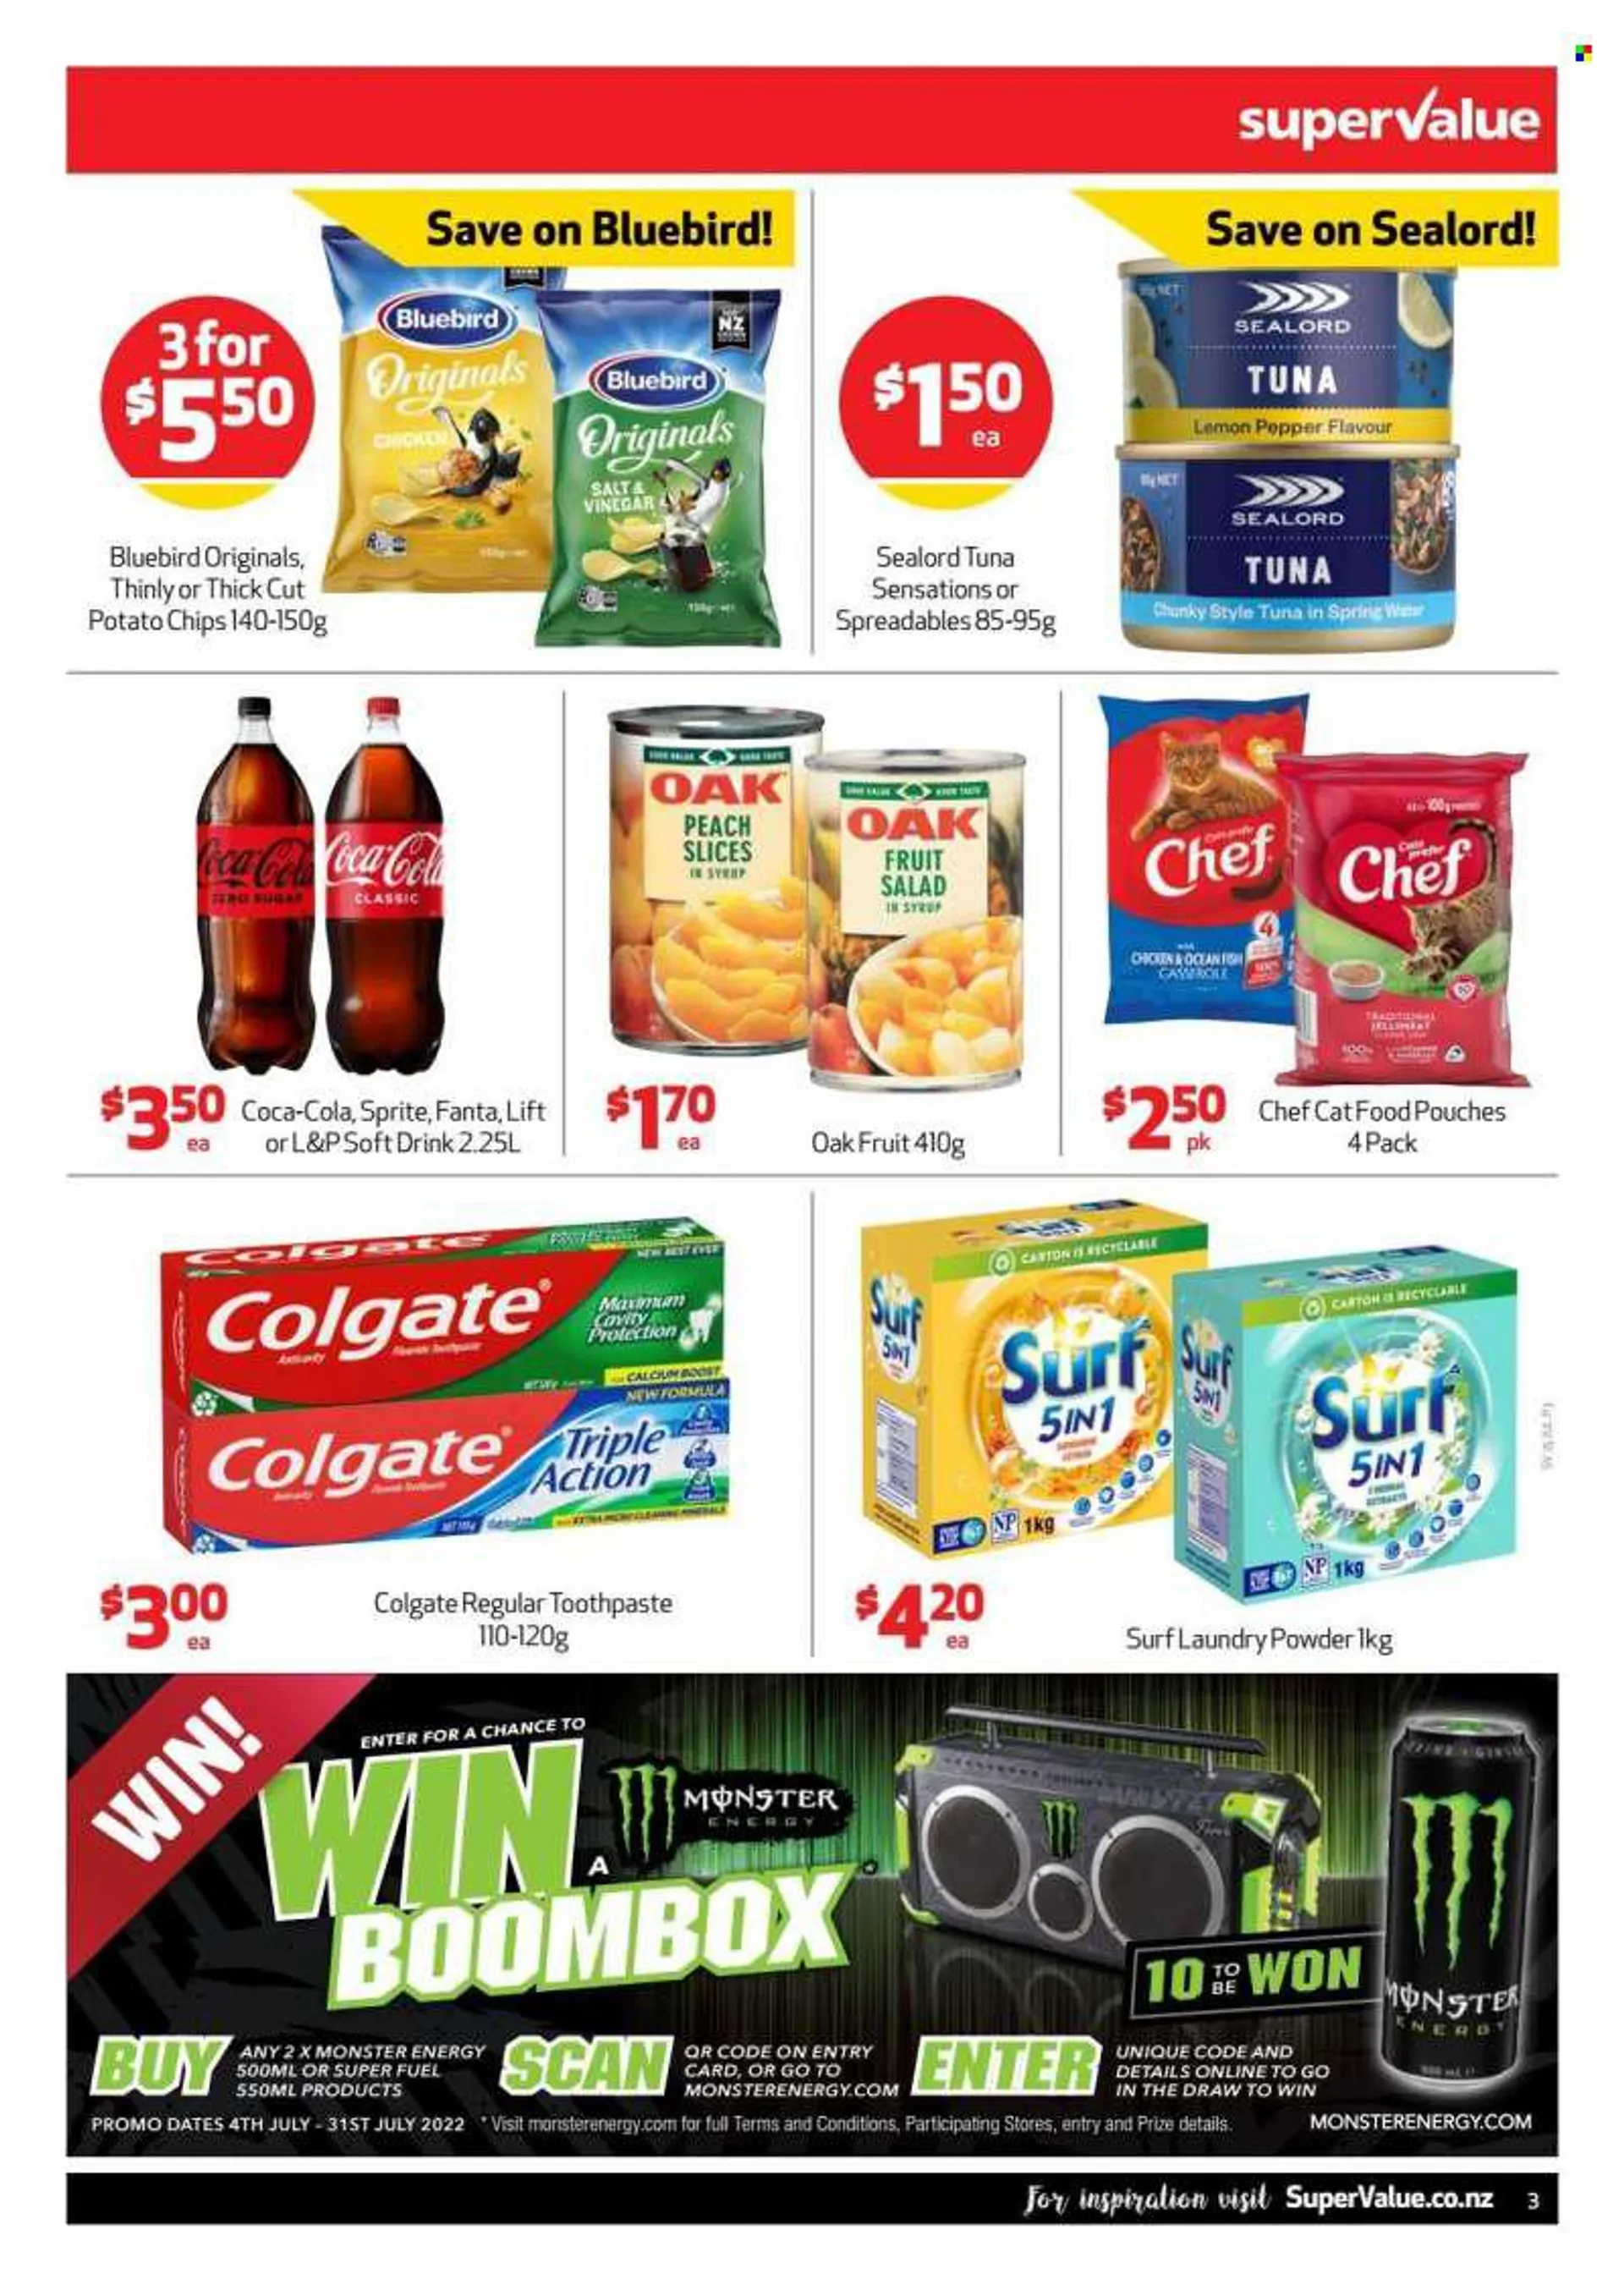 SuperValue mailer - 25.07.2022 - 31.07.2022 - Sales products - fish, Sealord, potato chips, chips, Bluebird, sealord tuna, fruit salad, Coca-Cola, Sprite, Monster, Fanta, soft drink, Coca-Cola zero, L&amp;P, Monster Energy, spring water, Boost, laundry po